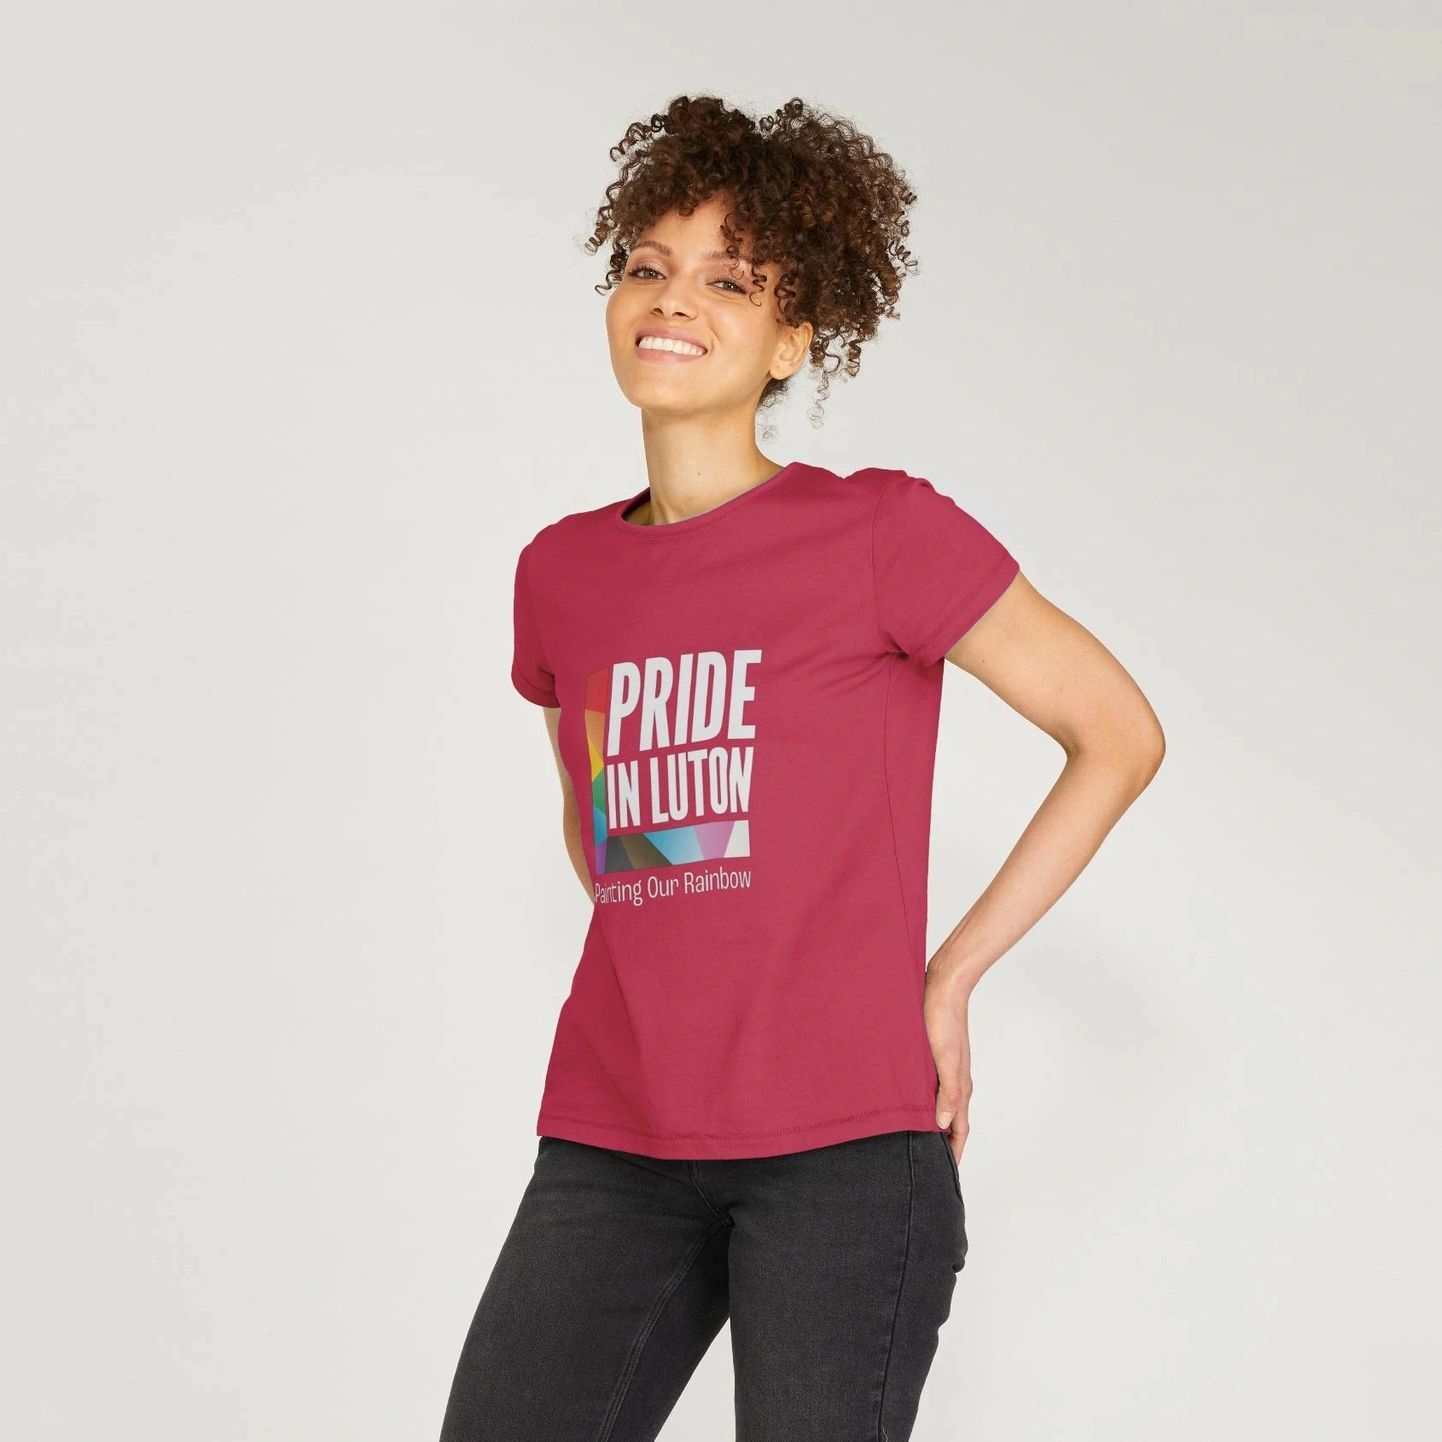 A smiling woman wearing a red tee with the light Pride In Luton logo printed on the front.